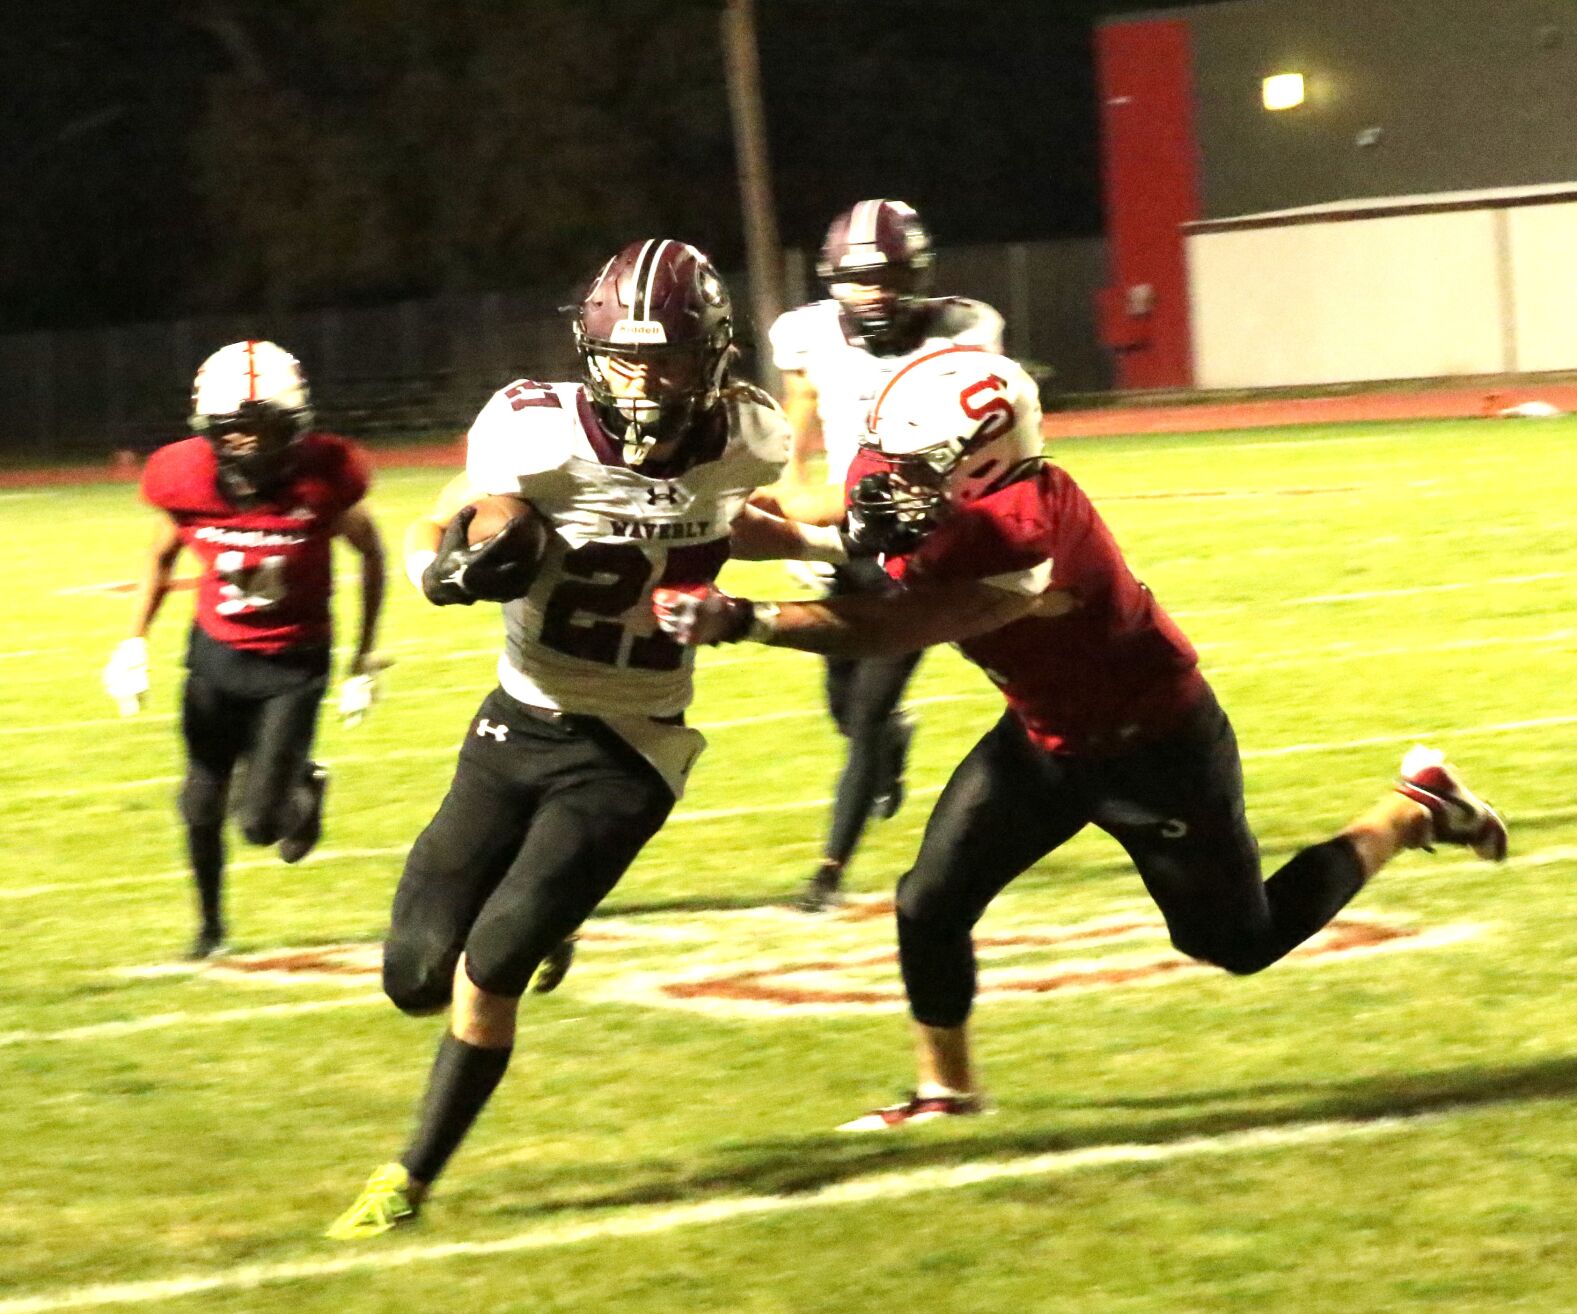 Scottsbluff Bearcats show improvement in second half but fall short in loss to Waverly